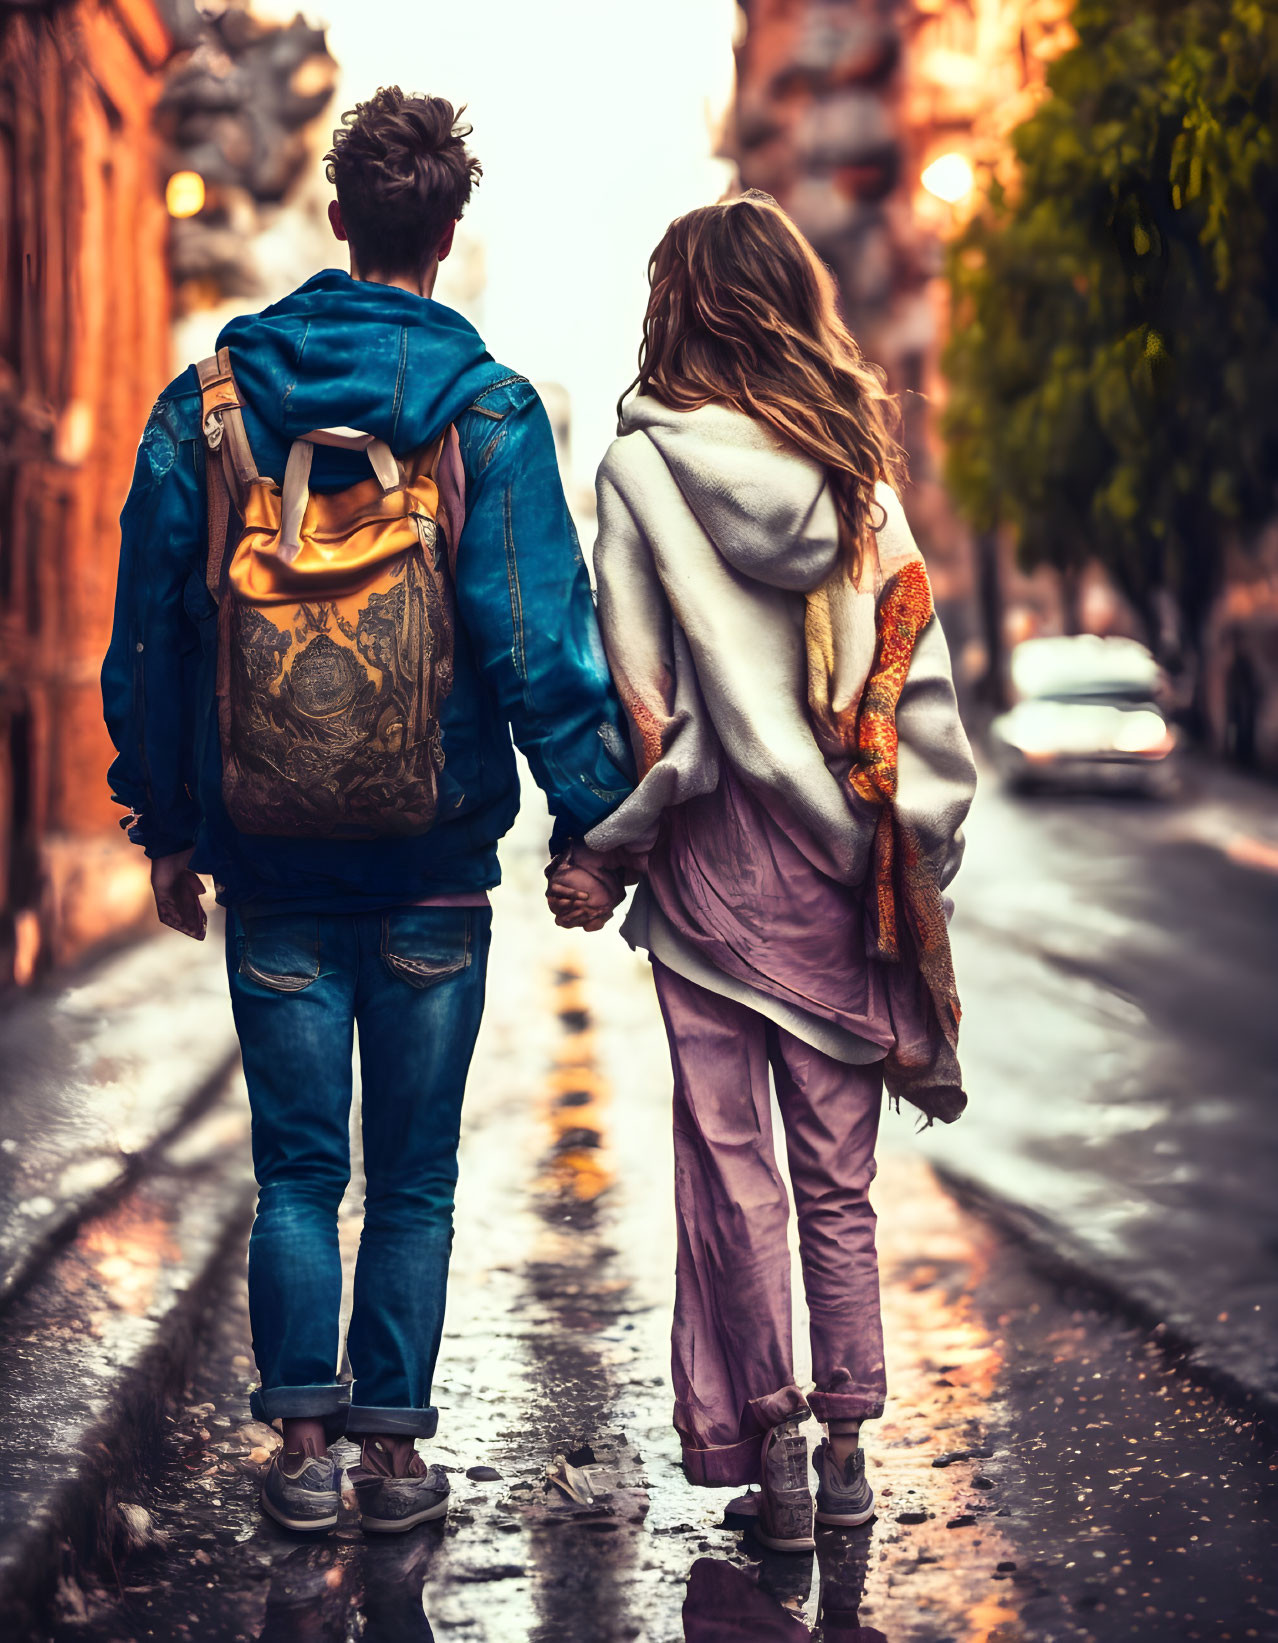 Couple Walking Hand in Hand on Wet Cobblestone Street at Night